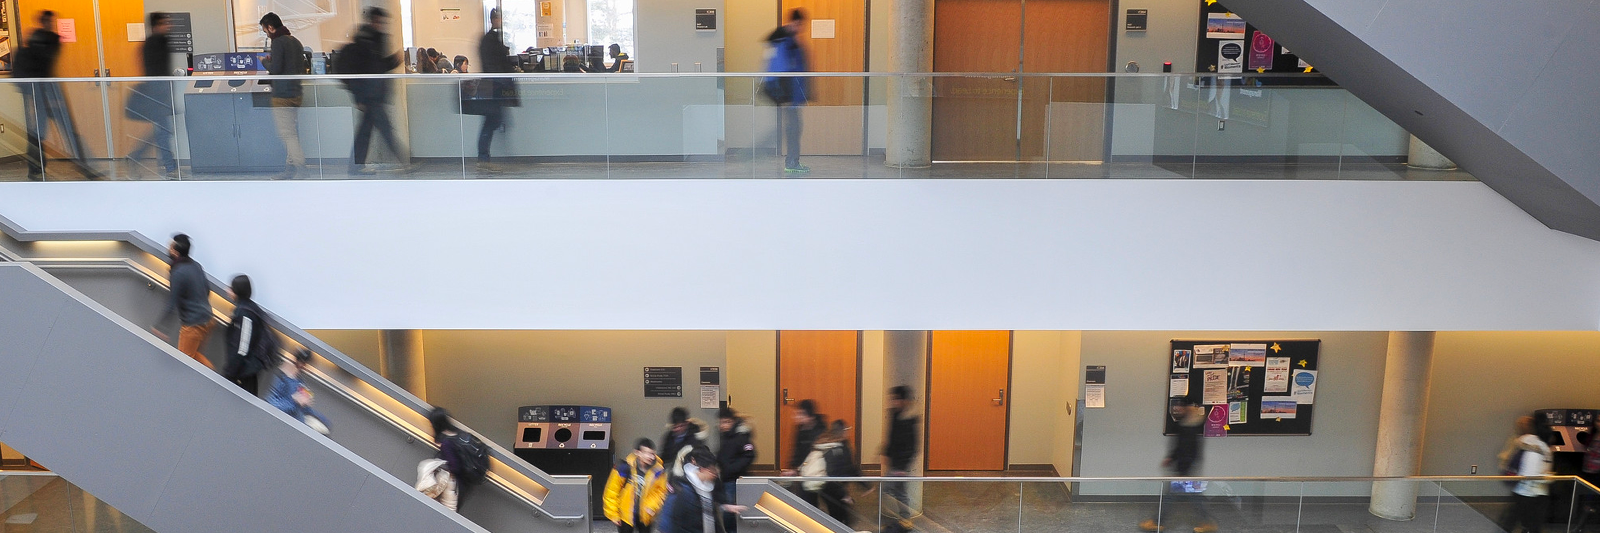 Students going up the stairs in the IC Building